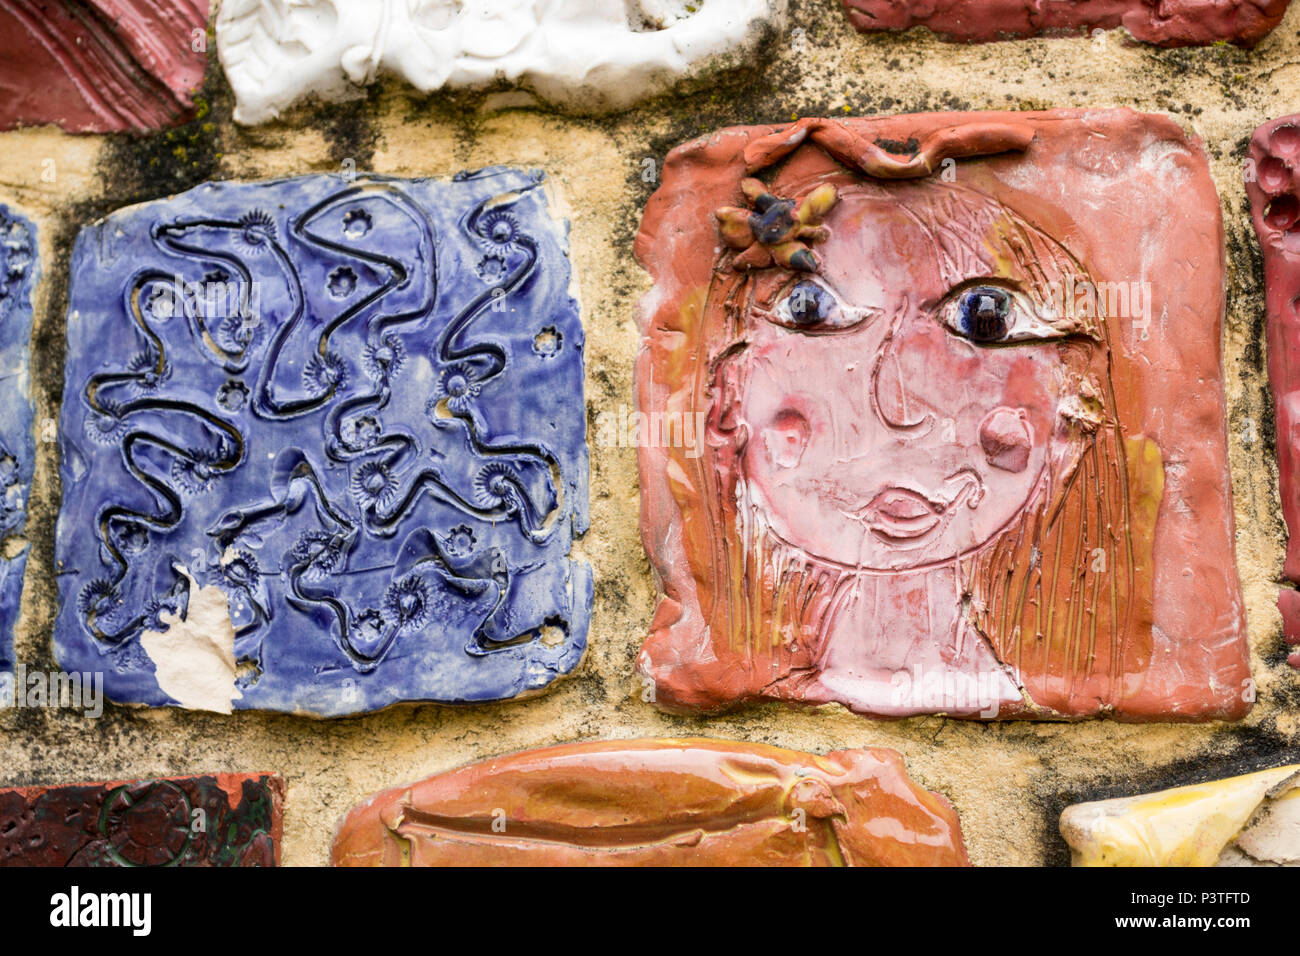 Mosiac of handmade ceramic tiles of showing a girl's face at Evreux, Normandy, France Stock Photo